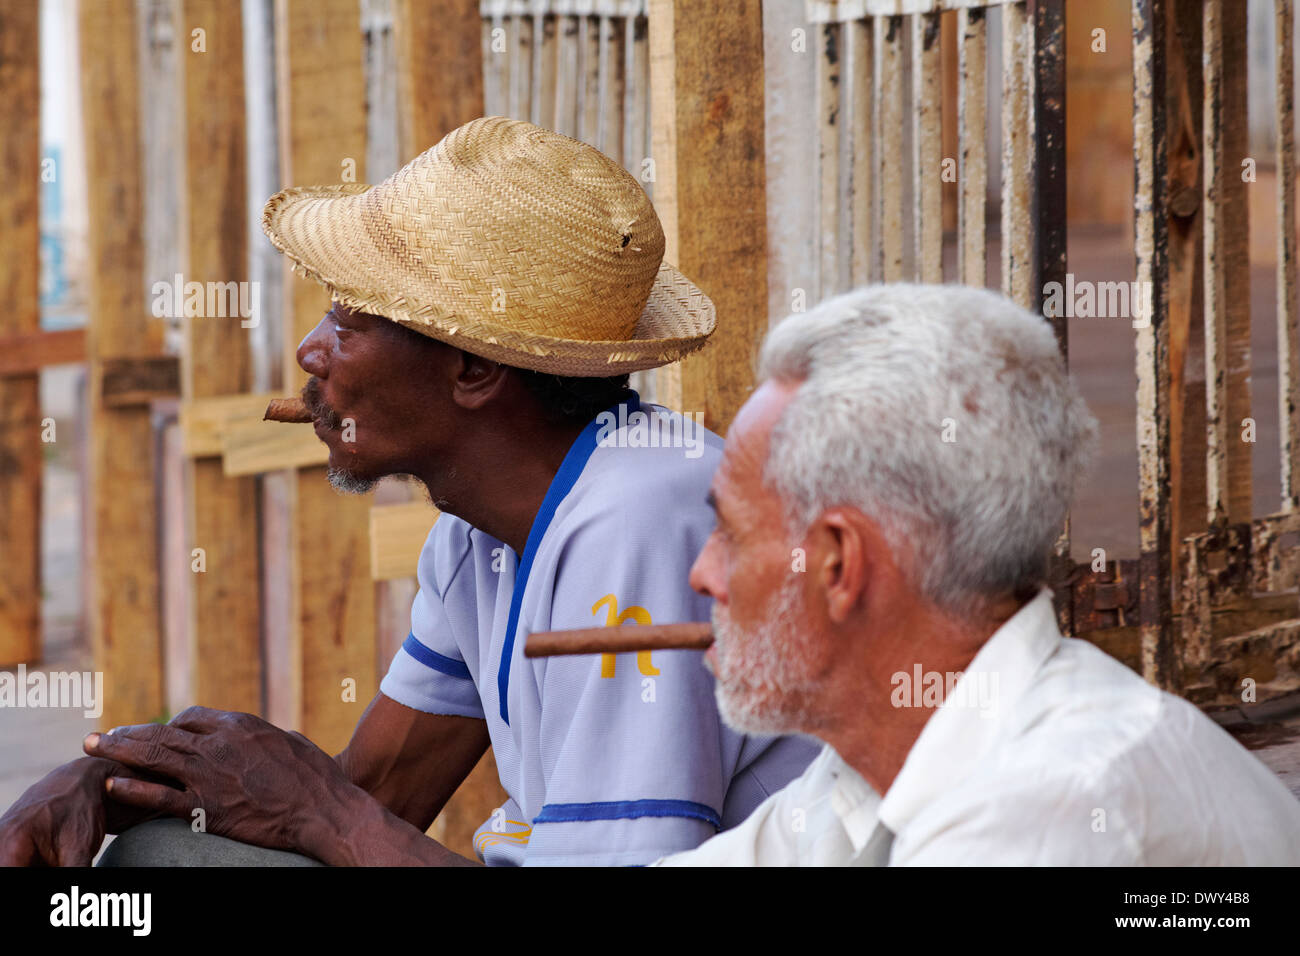 Daily life in Cuba - Men smoking cigars at Trinidad, Cuba, West Indies, Caribbean, Central America in March Stock Photo